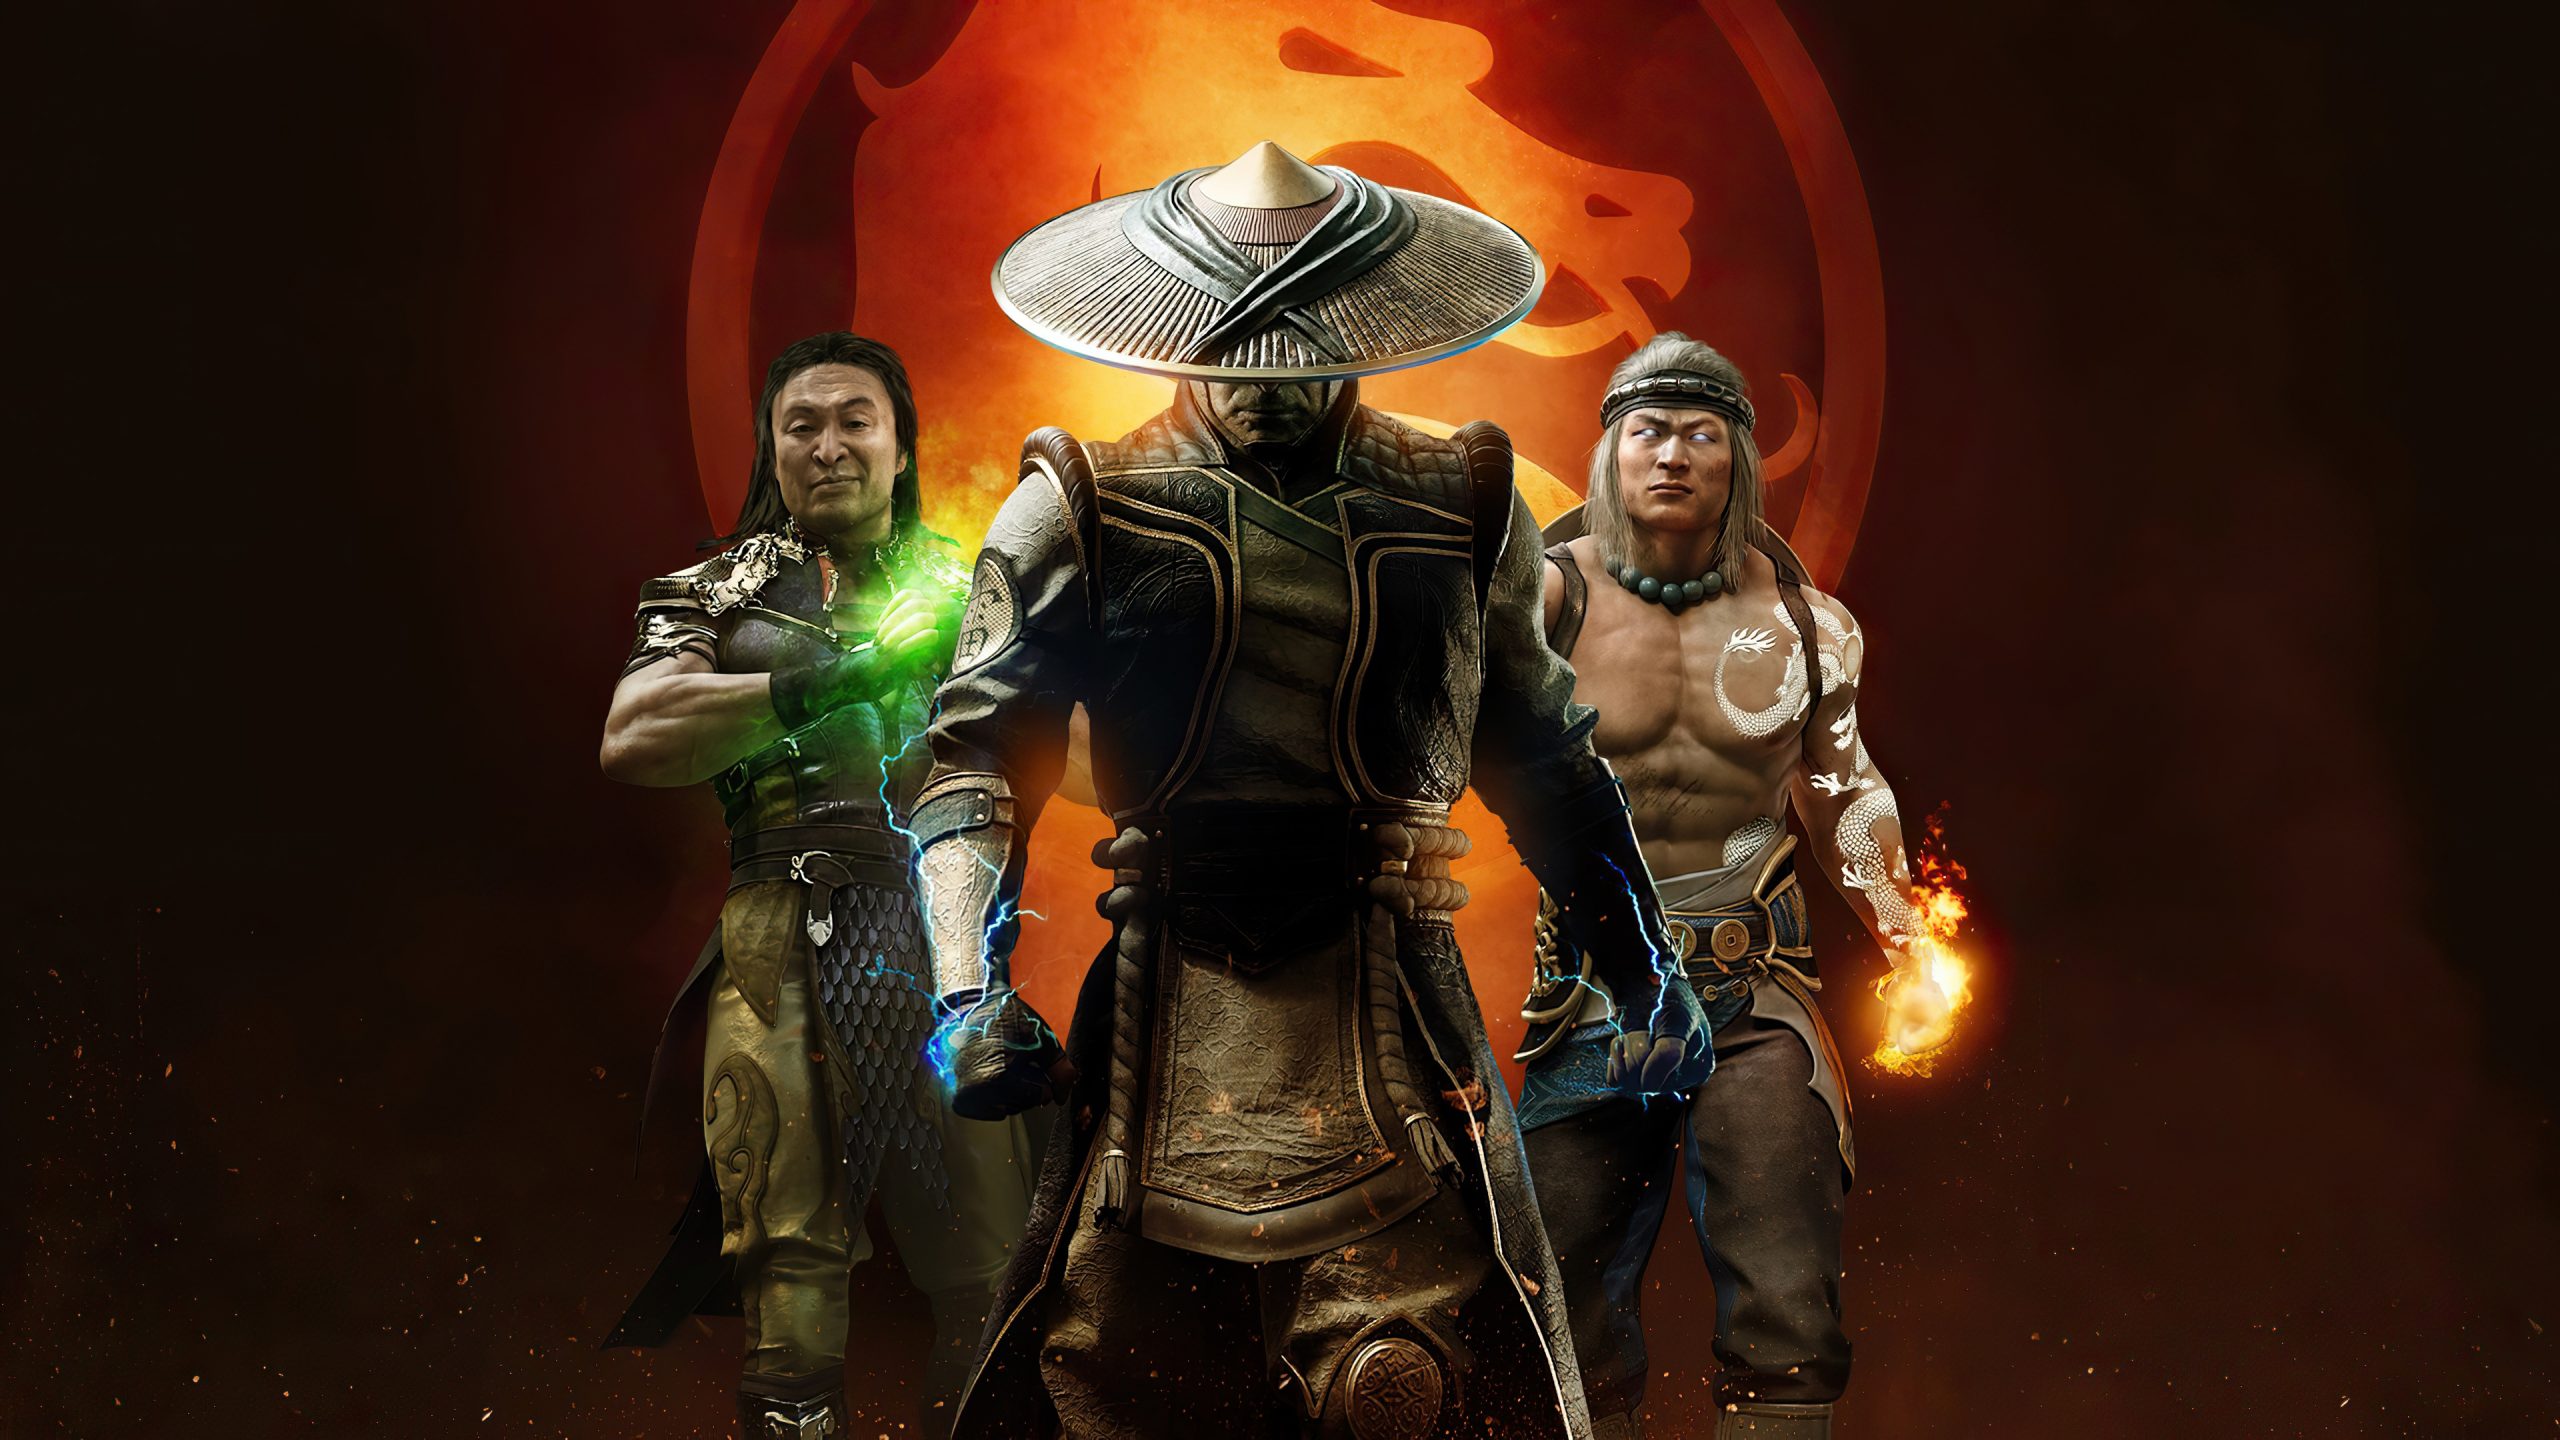 Raiden and Shao Kahn were brothers in an alternate Mortal Kombat timeline  that was erased by Kronika